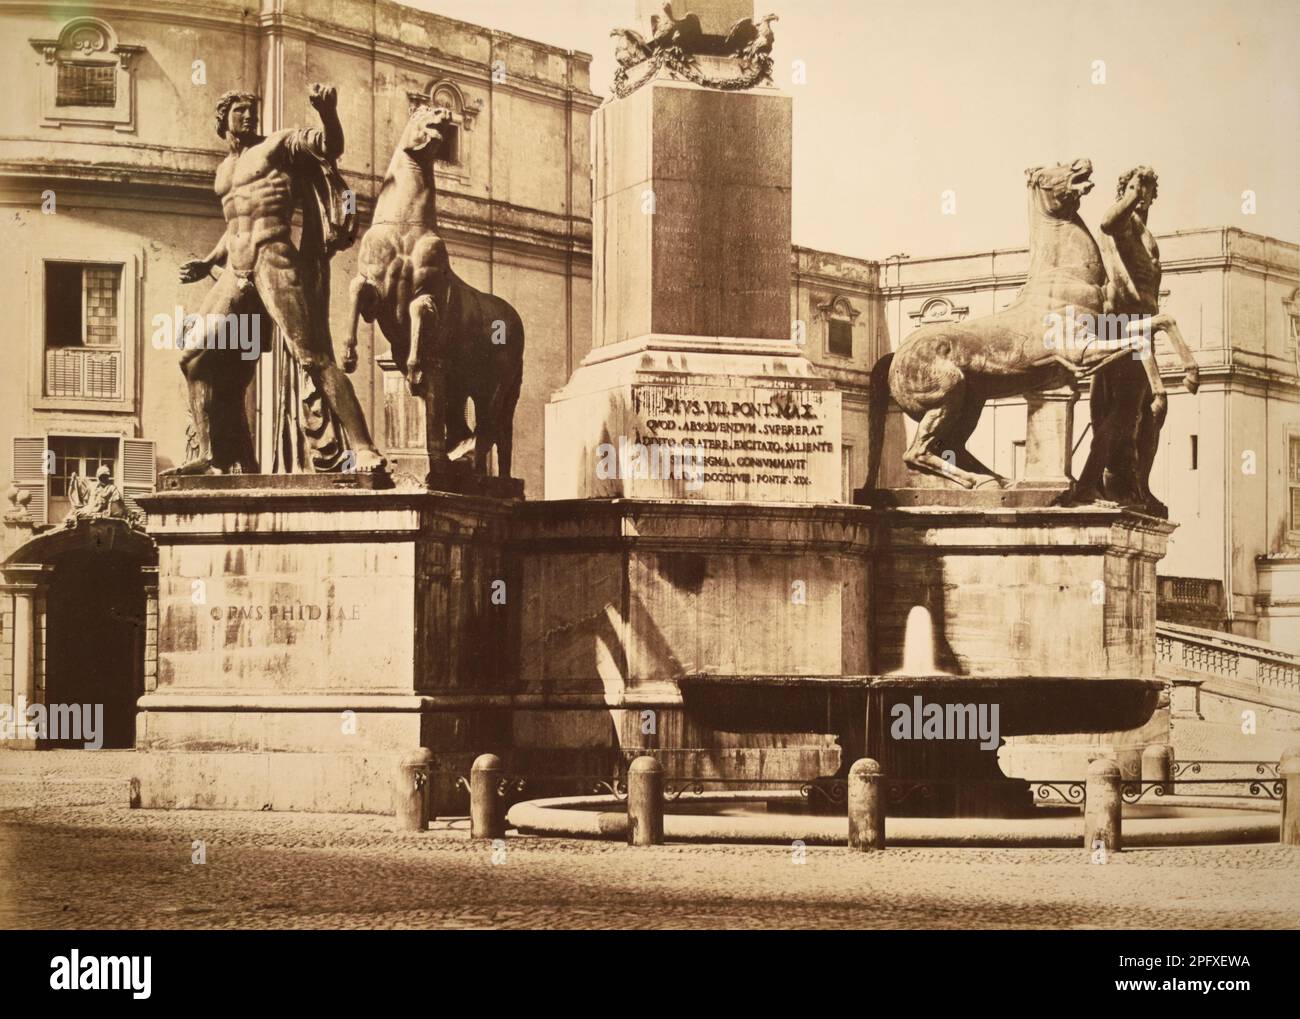 Dioscuri Statues, the Horse Tamers or Castor and Pollux, and Roman Obelisk of Quirinale, on Piazza del Quirinale, Quirinal Hill, Rome Italy. Vintage Black and White or Sepia Photograph c1855 by Tommaso Cuccioni Stock Photo